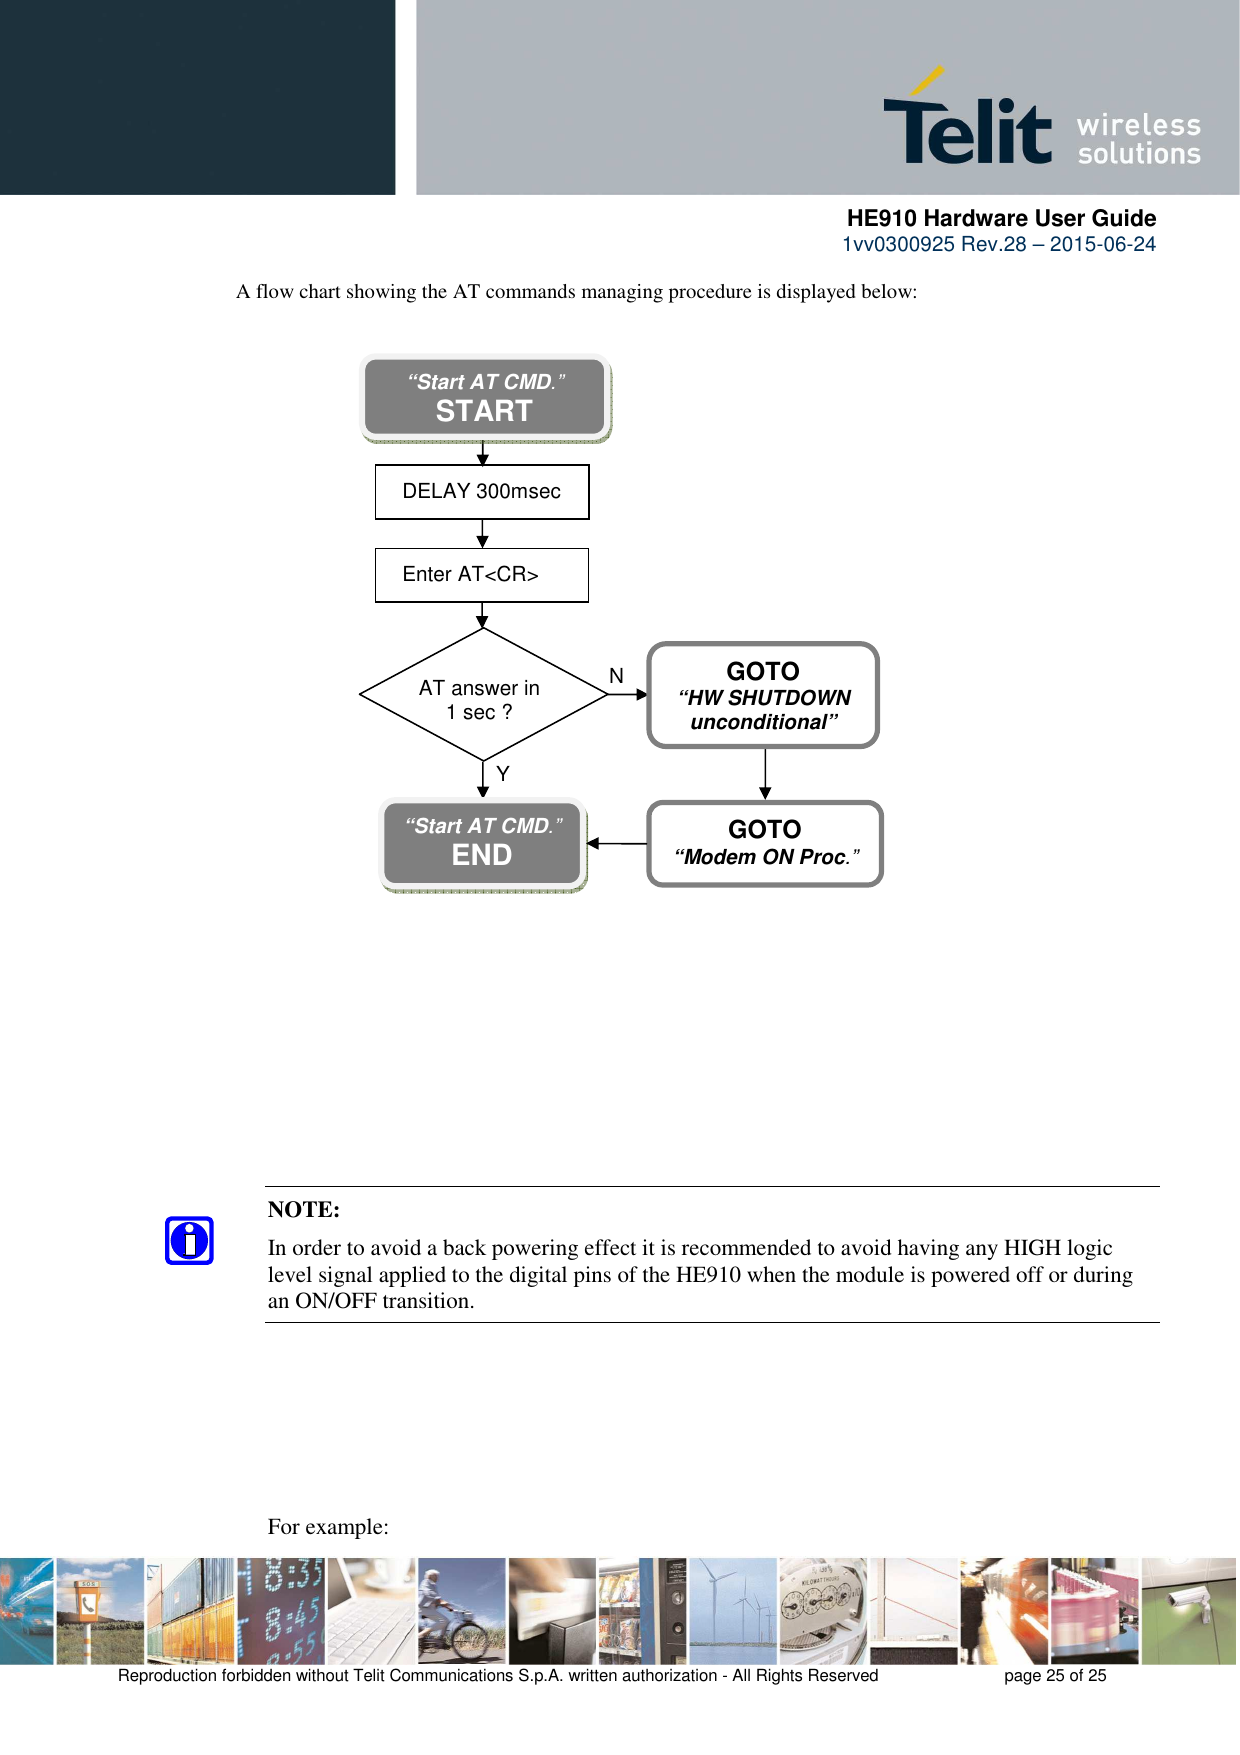      HE910 Hardware User Guide 1vv0300925 Rev.28 – 2015-06-24    Reproduction forbidden without Telit Communications S.p.A. written authorization - All Rights Reserved    page 25 of 25  A flow chart showing the AT commands managing procedure is displayed below:              NOTE:  In order to avoid a back powering effect it is recommended to avoid having any HIGH logic level signal applied to the digital pins of the HE910 when the module is powered off or during an ON/OFF transition.        For example: AT answer in  1 sec ? N Y “Start AT CMD.” START DELAY 300msec  Enter AT&lt;CR&gt; “Start AT CMD.” END  GOTO “HW SHUTDOWN unconditional” GOTO “Modem ON Proc.” 